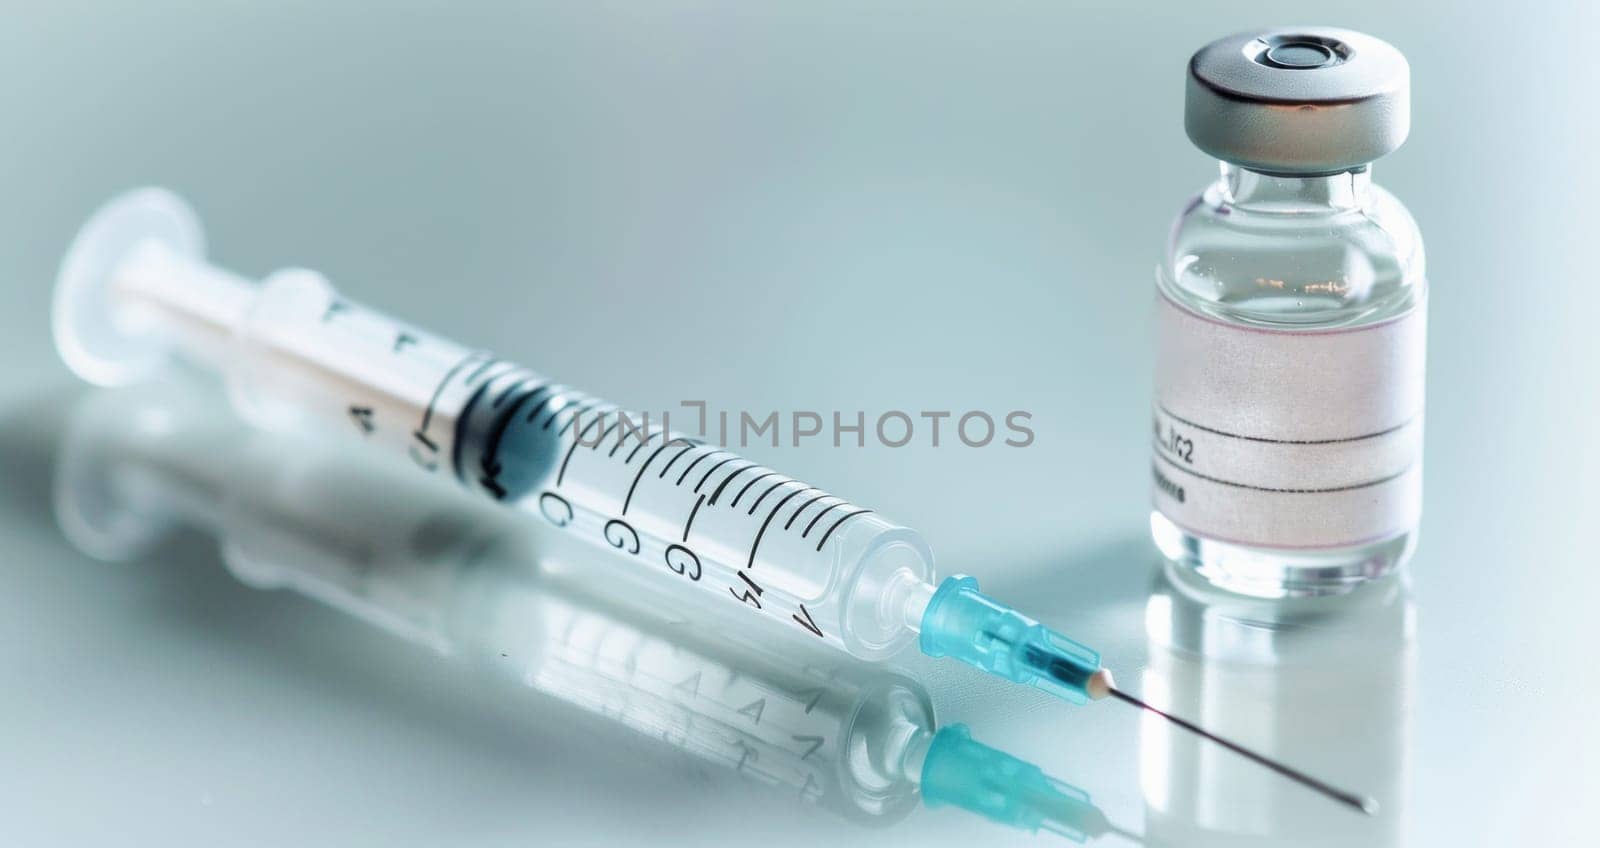 Beside the bottle on the table sits a syringe filled with vaccine, essential for the organisms health